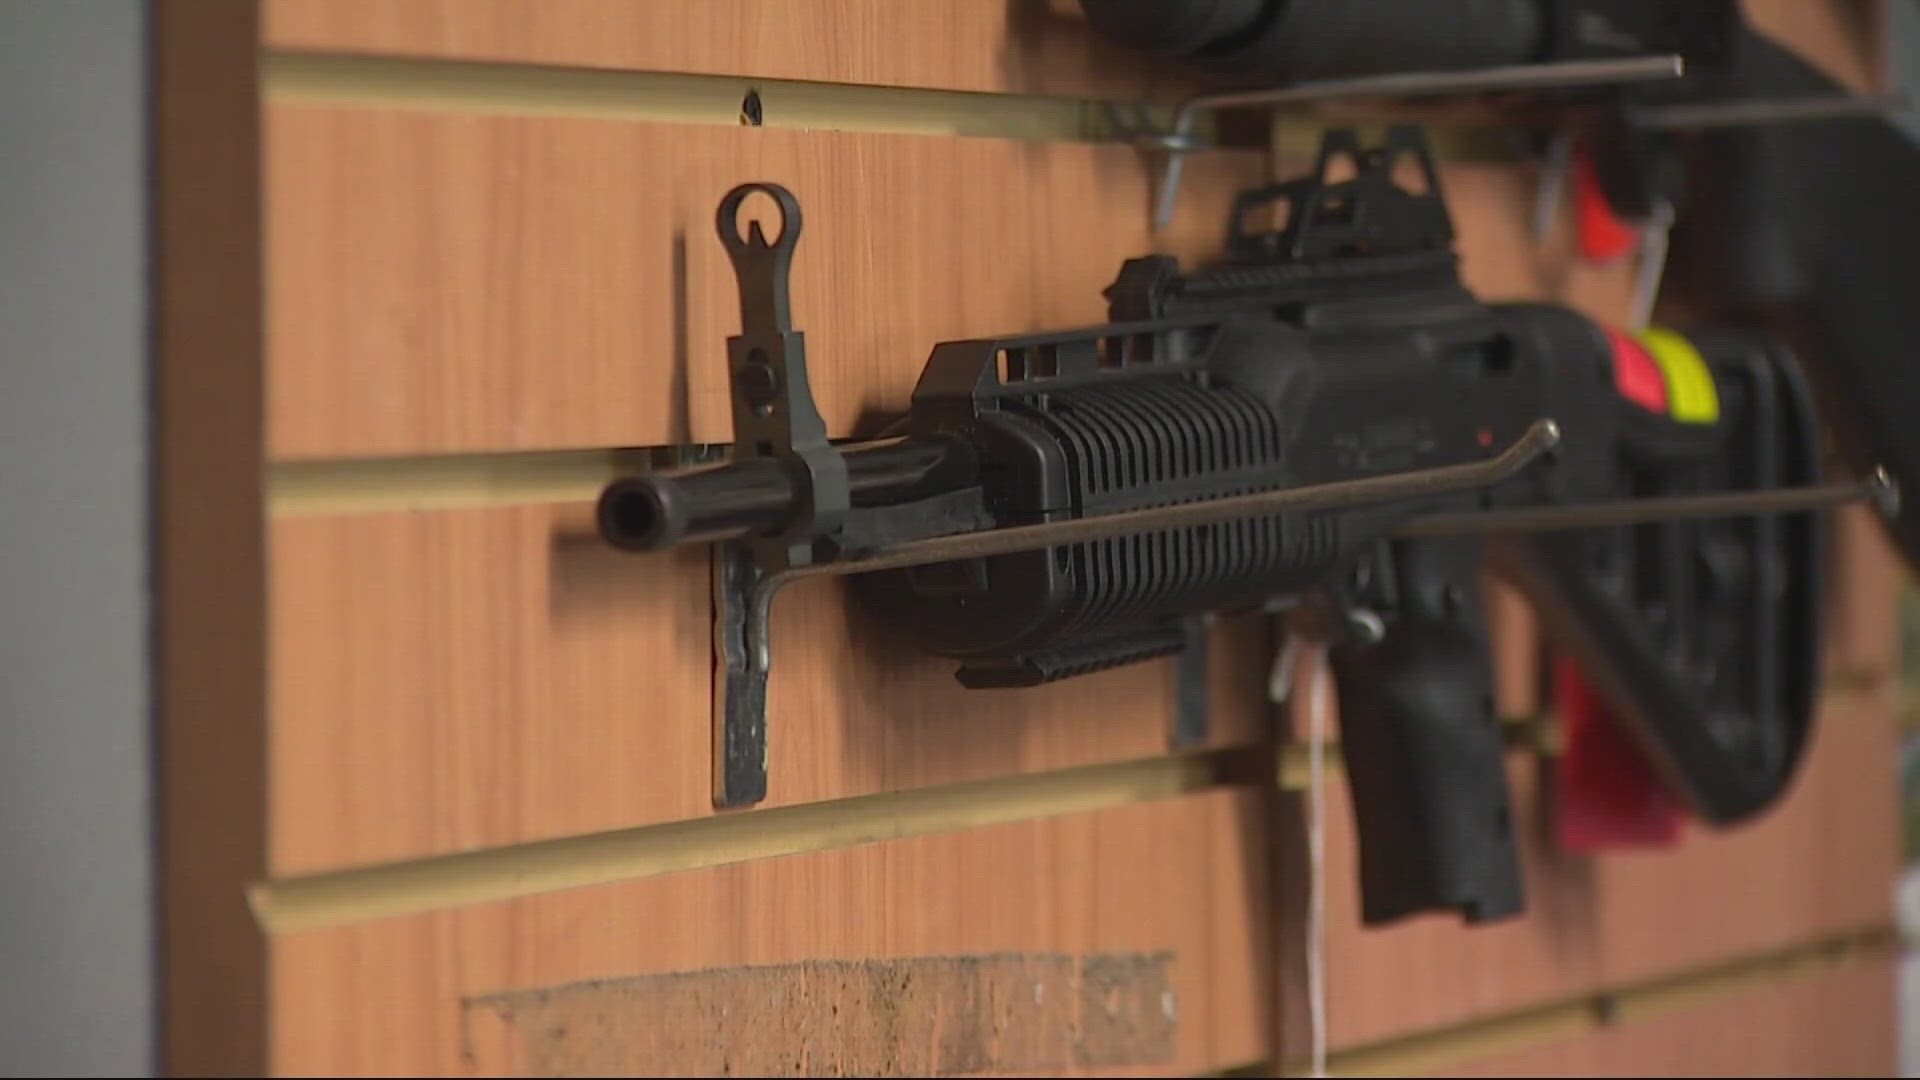 Washington primed to ban the sale or transfer of assault weapons